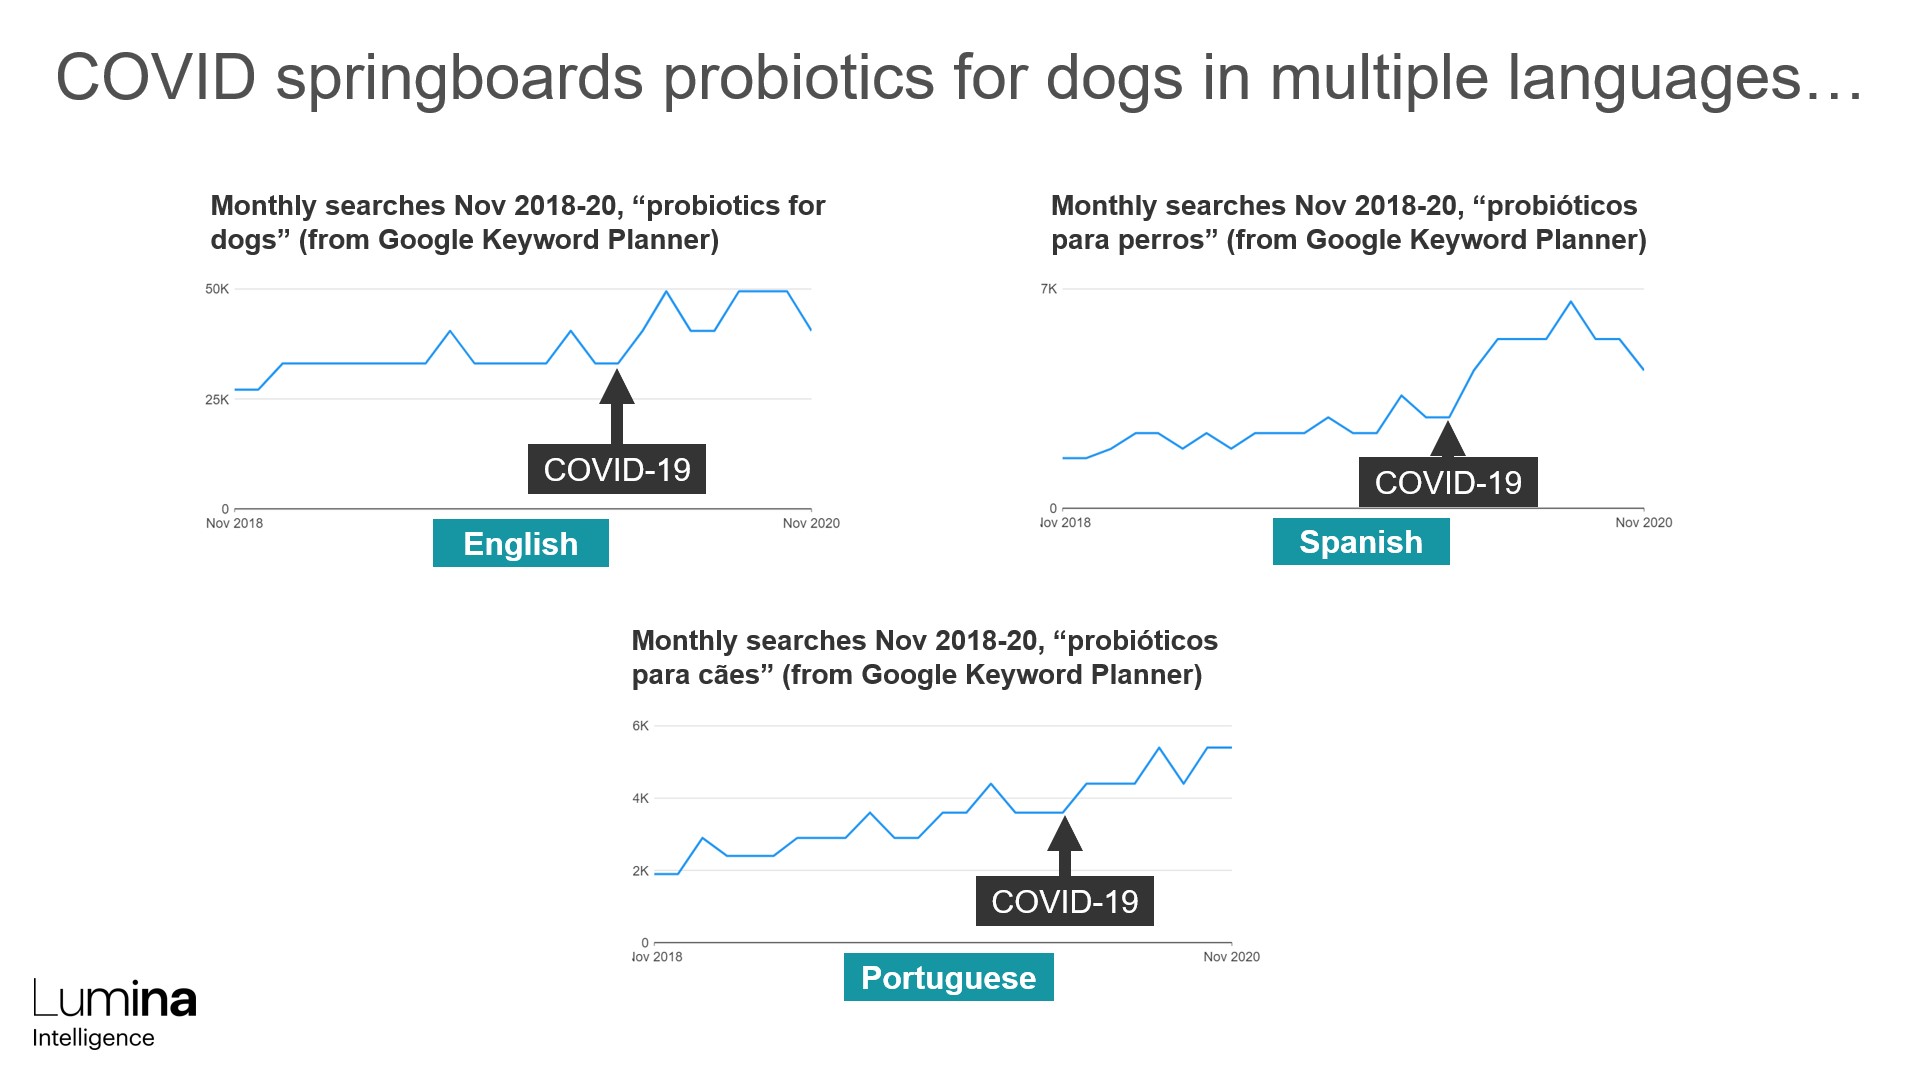 Probiotics for dogs search volume